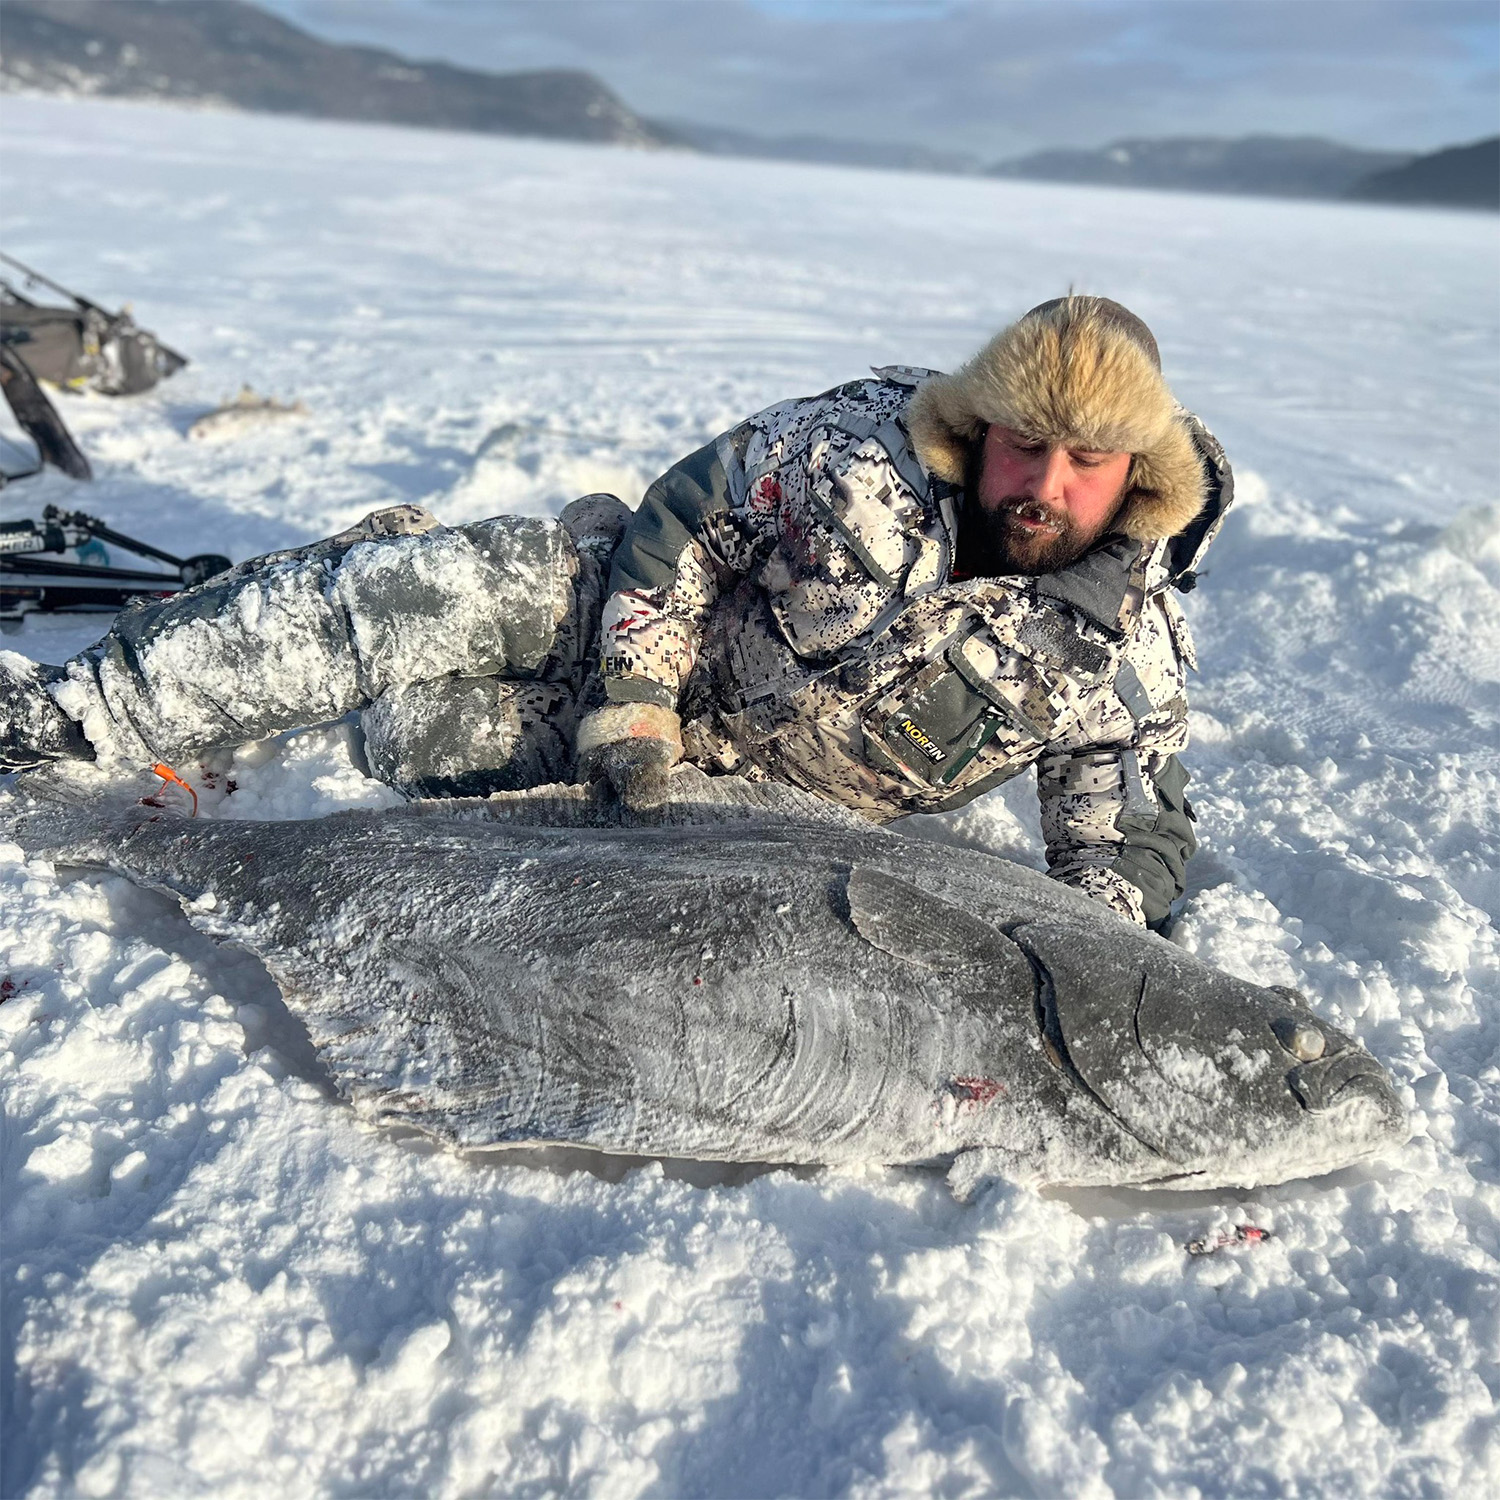 An ice fisherman from Quebec lies on the ice next to a giant halibut.